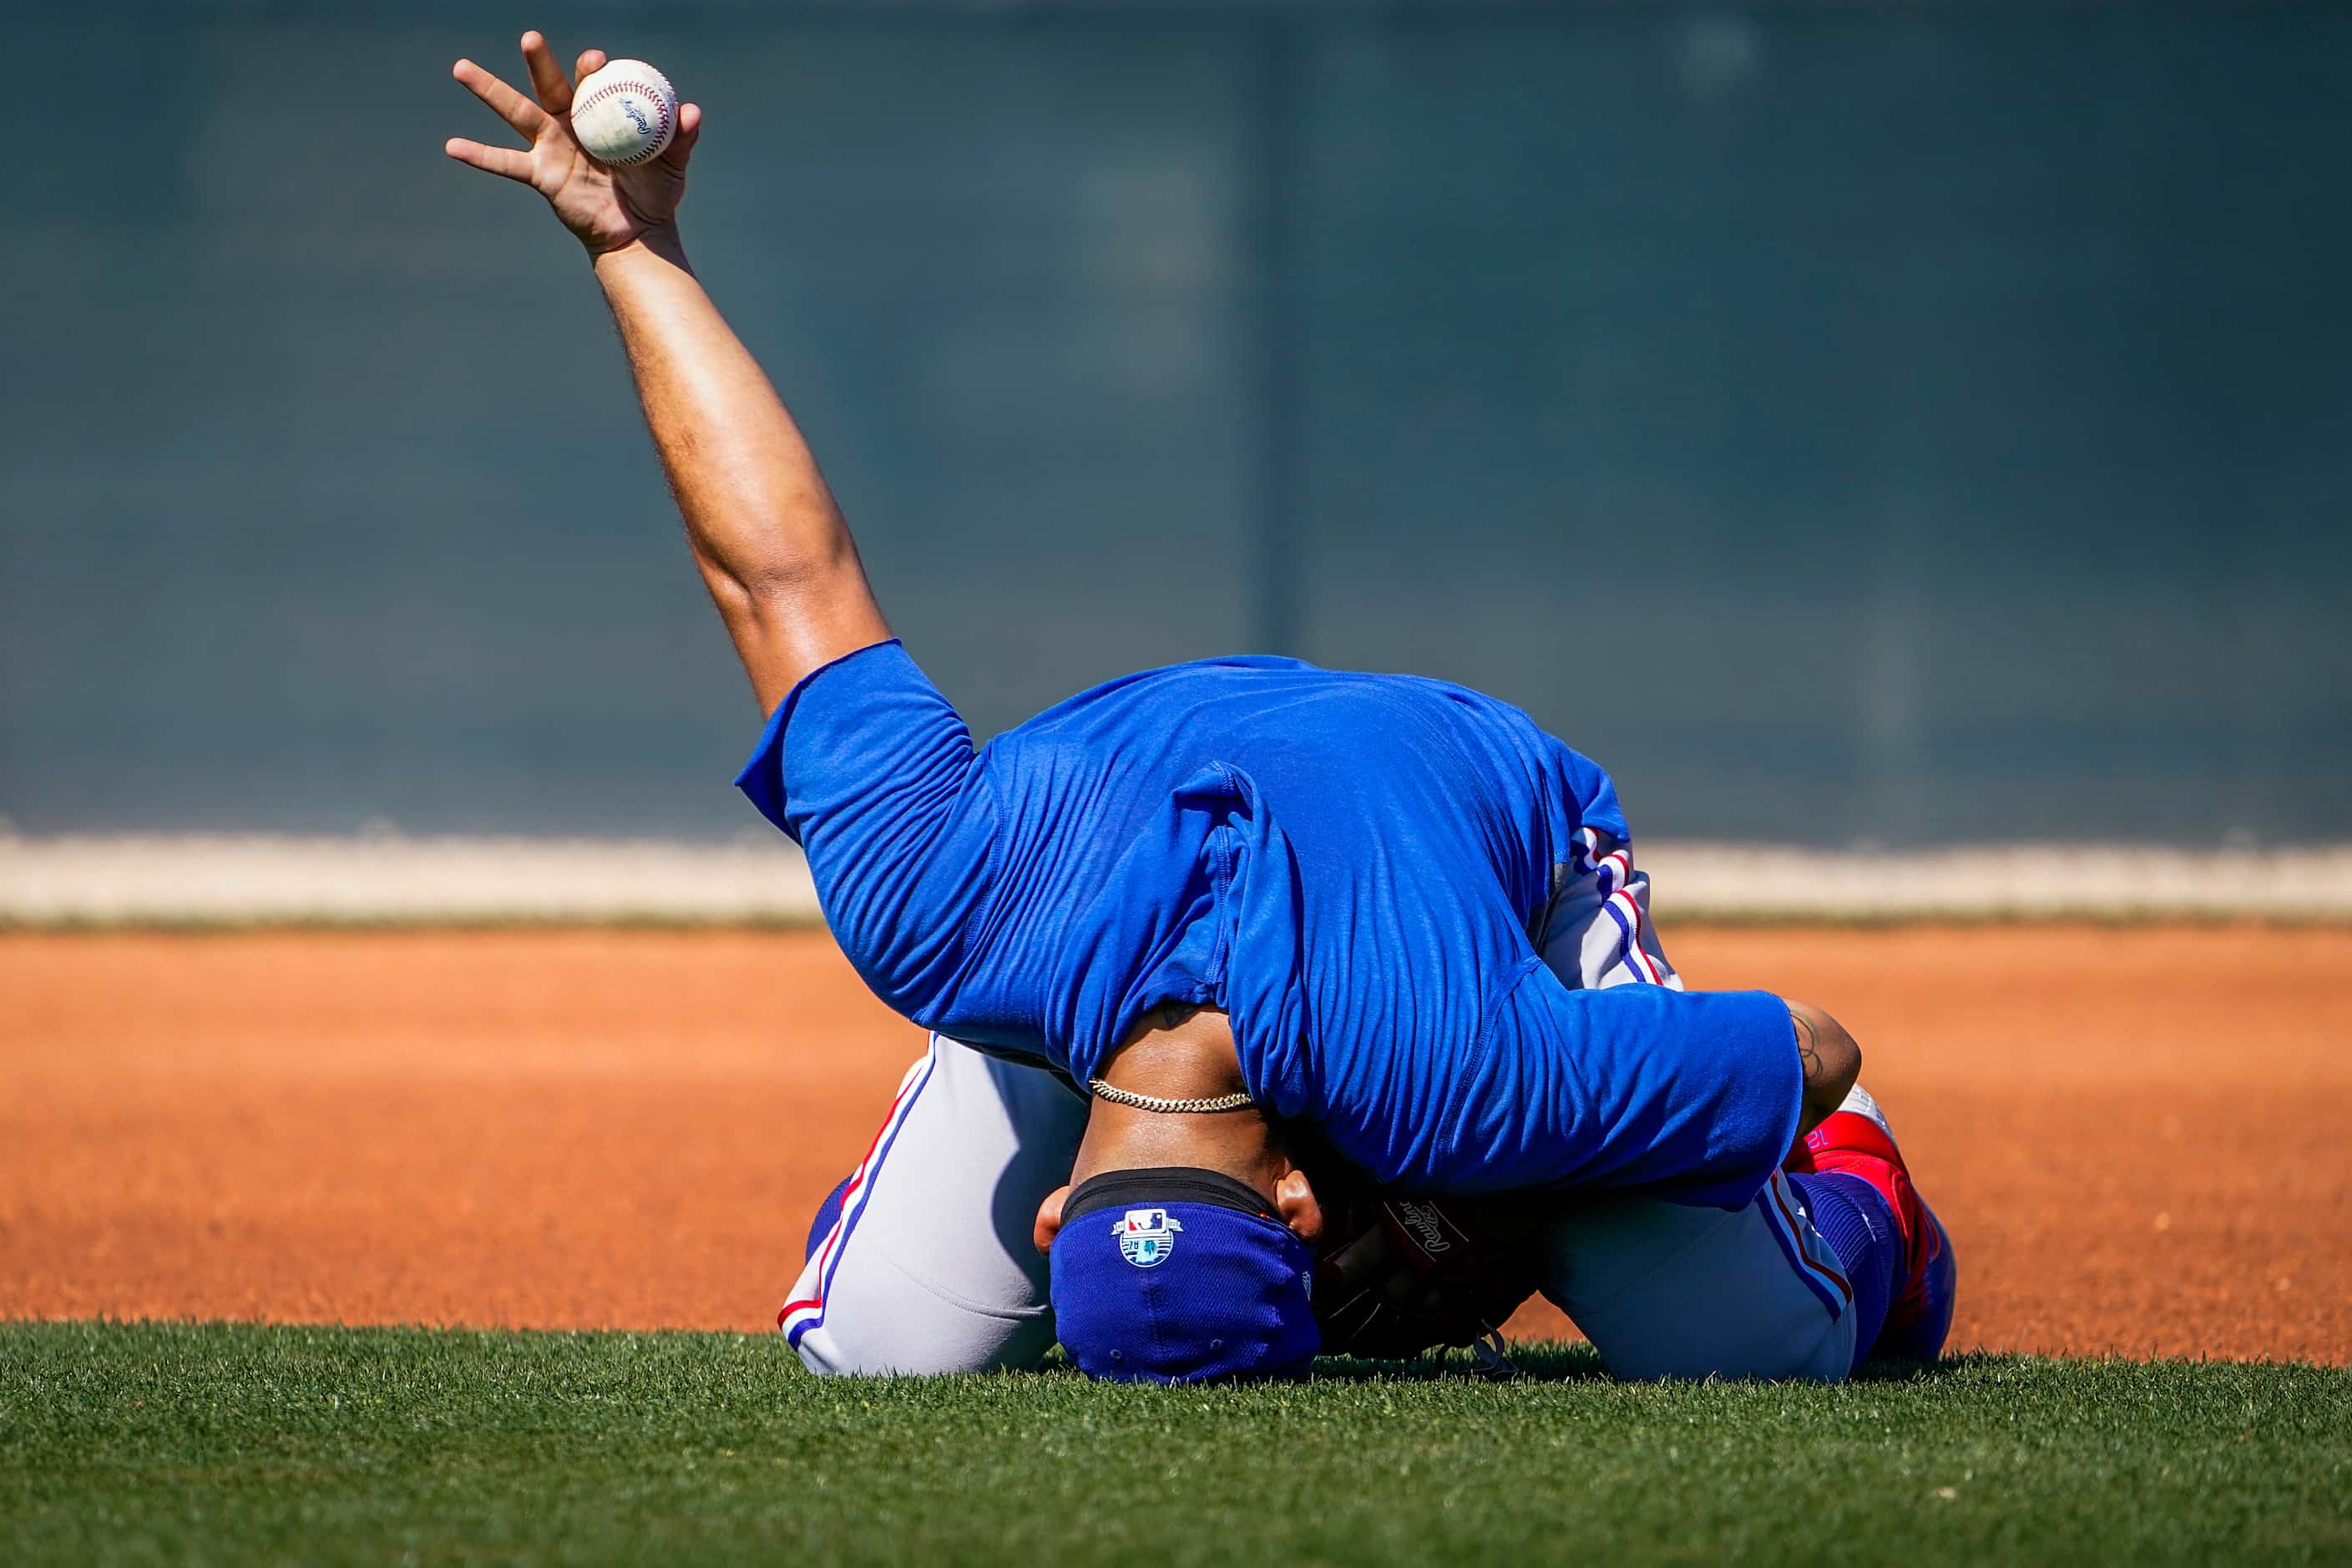 Texas Rangers second baseman Rougned Odor show off the ball after making a catch in a...